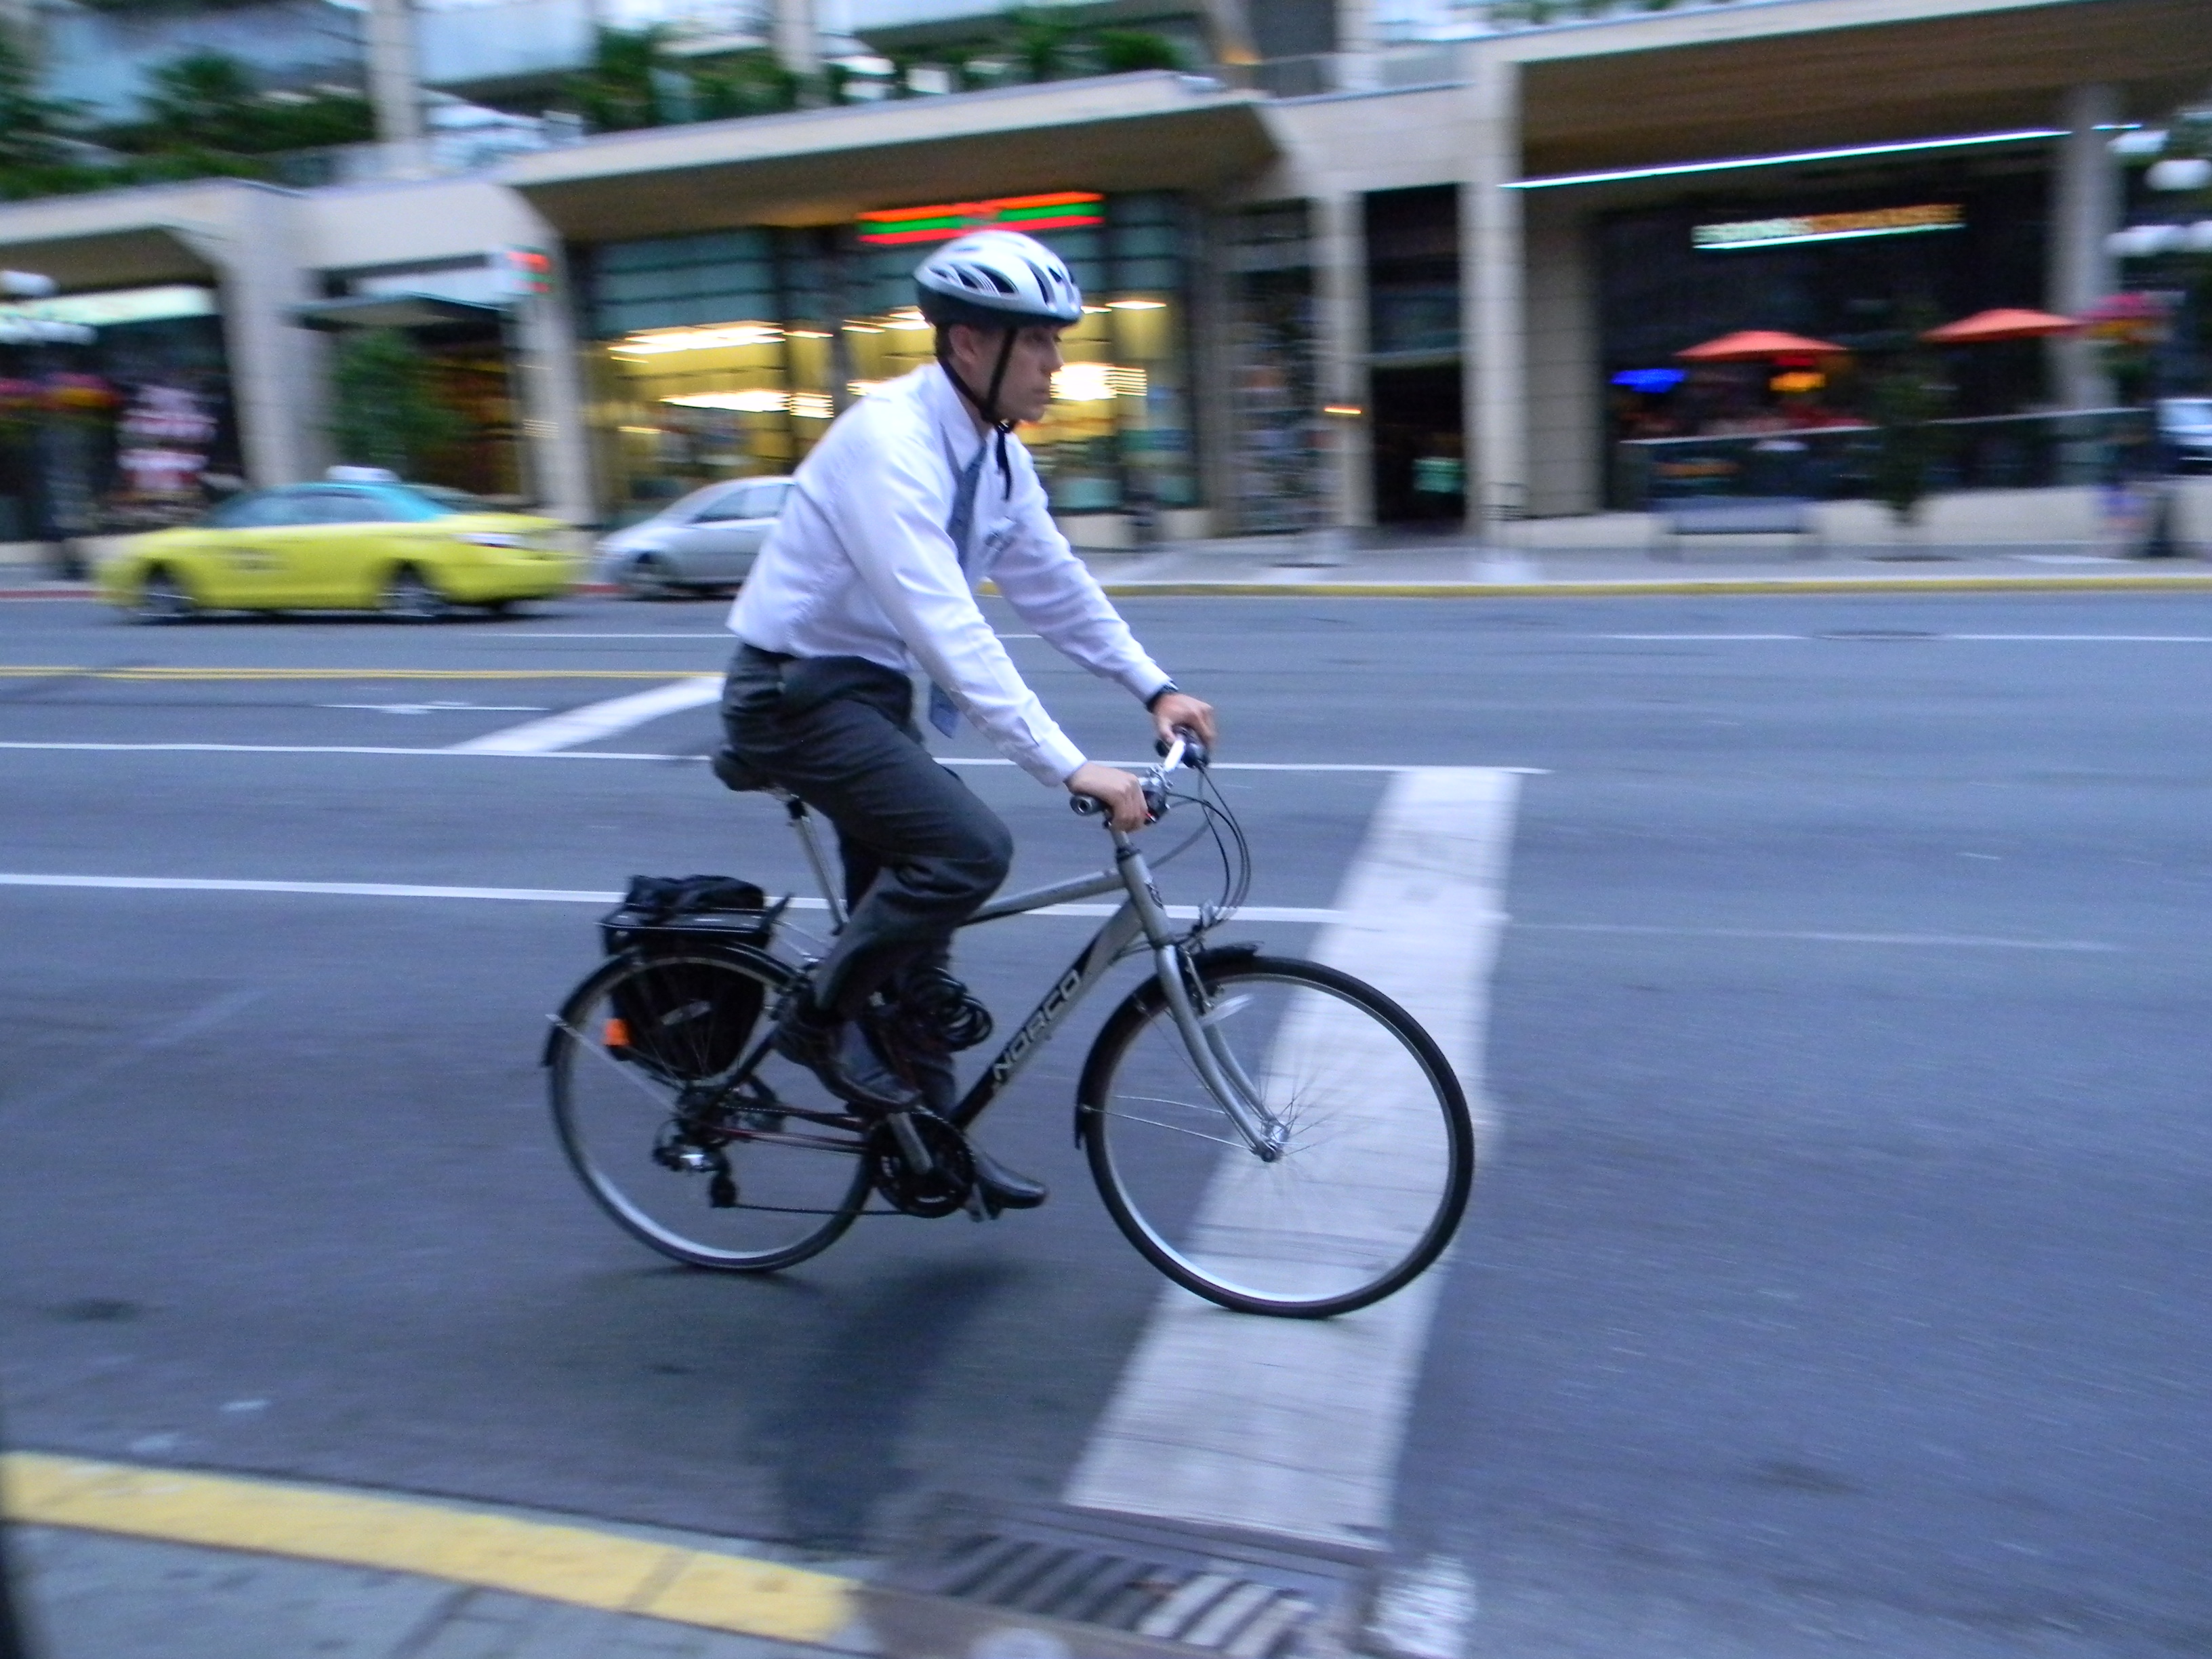 Studies have shown that biking to work boosts employee productivity, improves health, and increases lifespan. (photo by John Luton, CC 2.0 license)